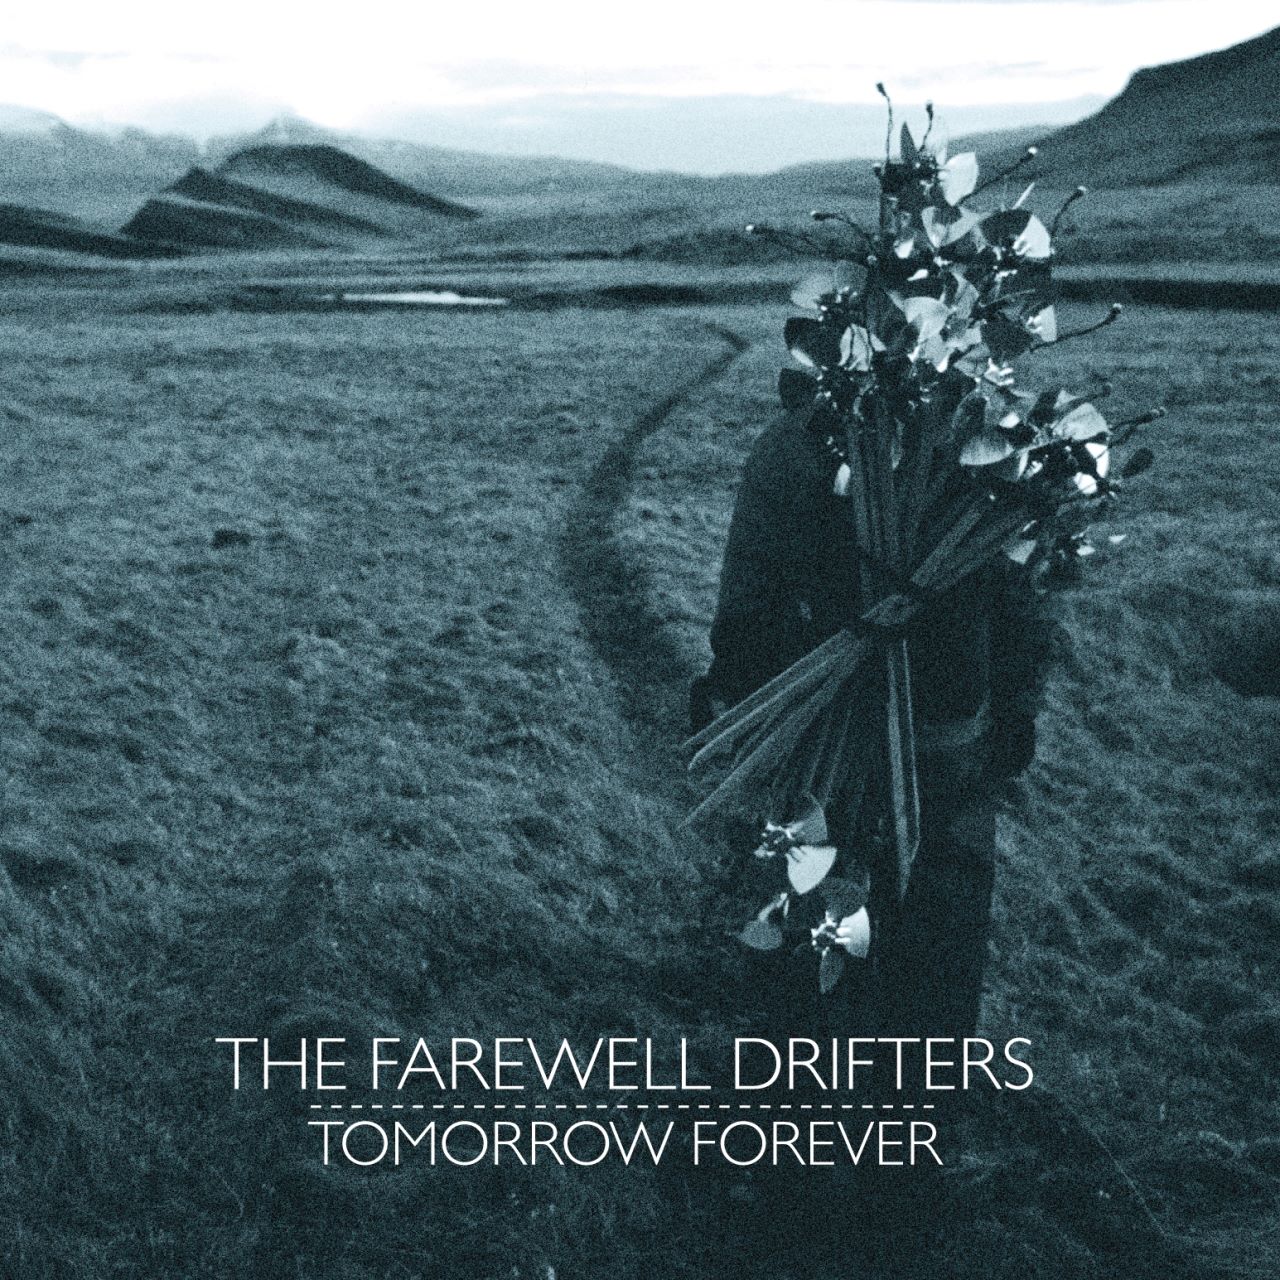 Farewell Drifters - Tomorrow Forever cover album